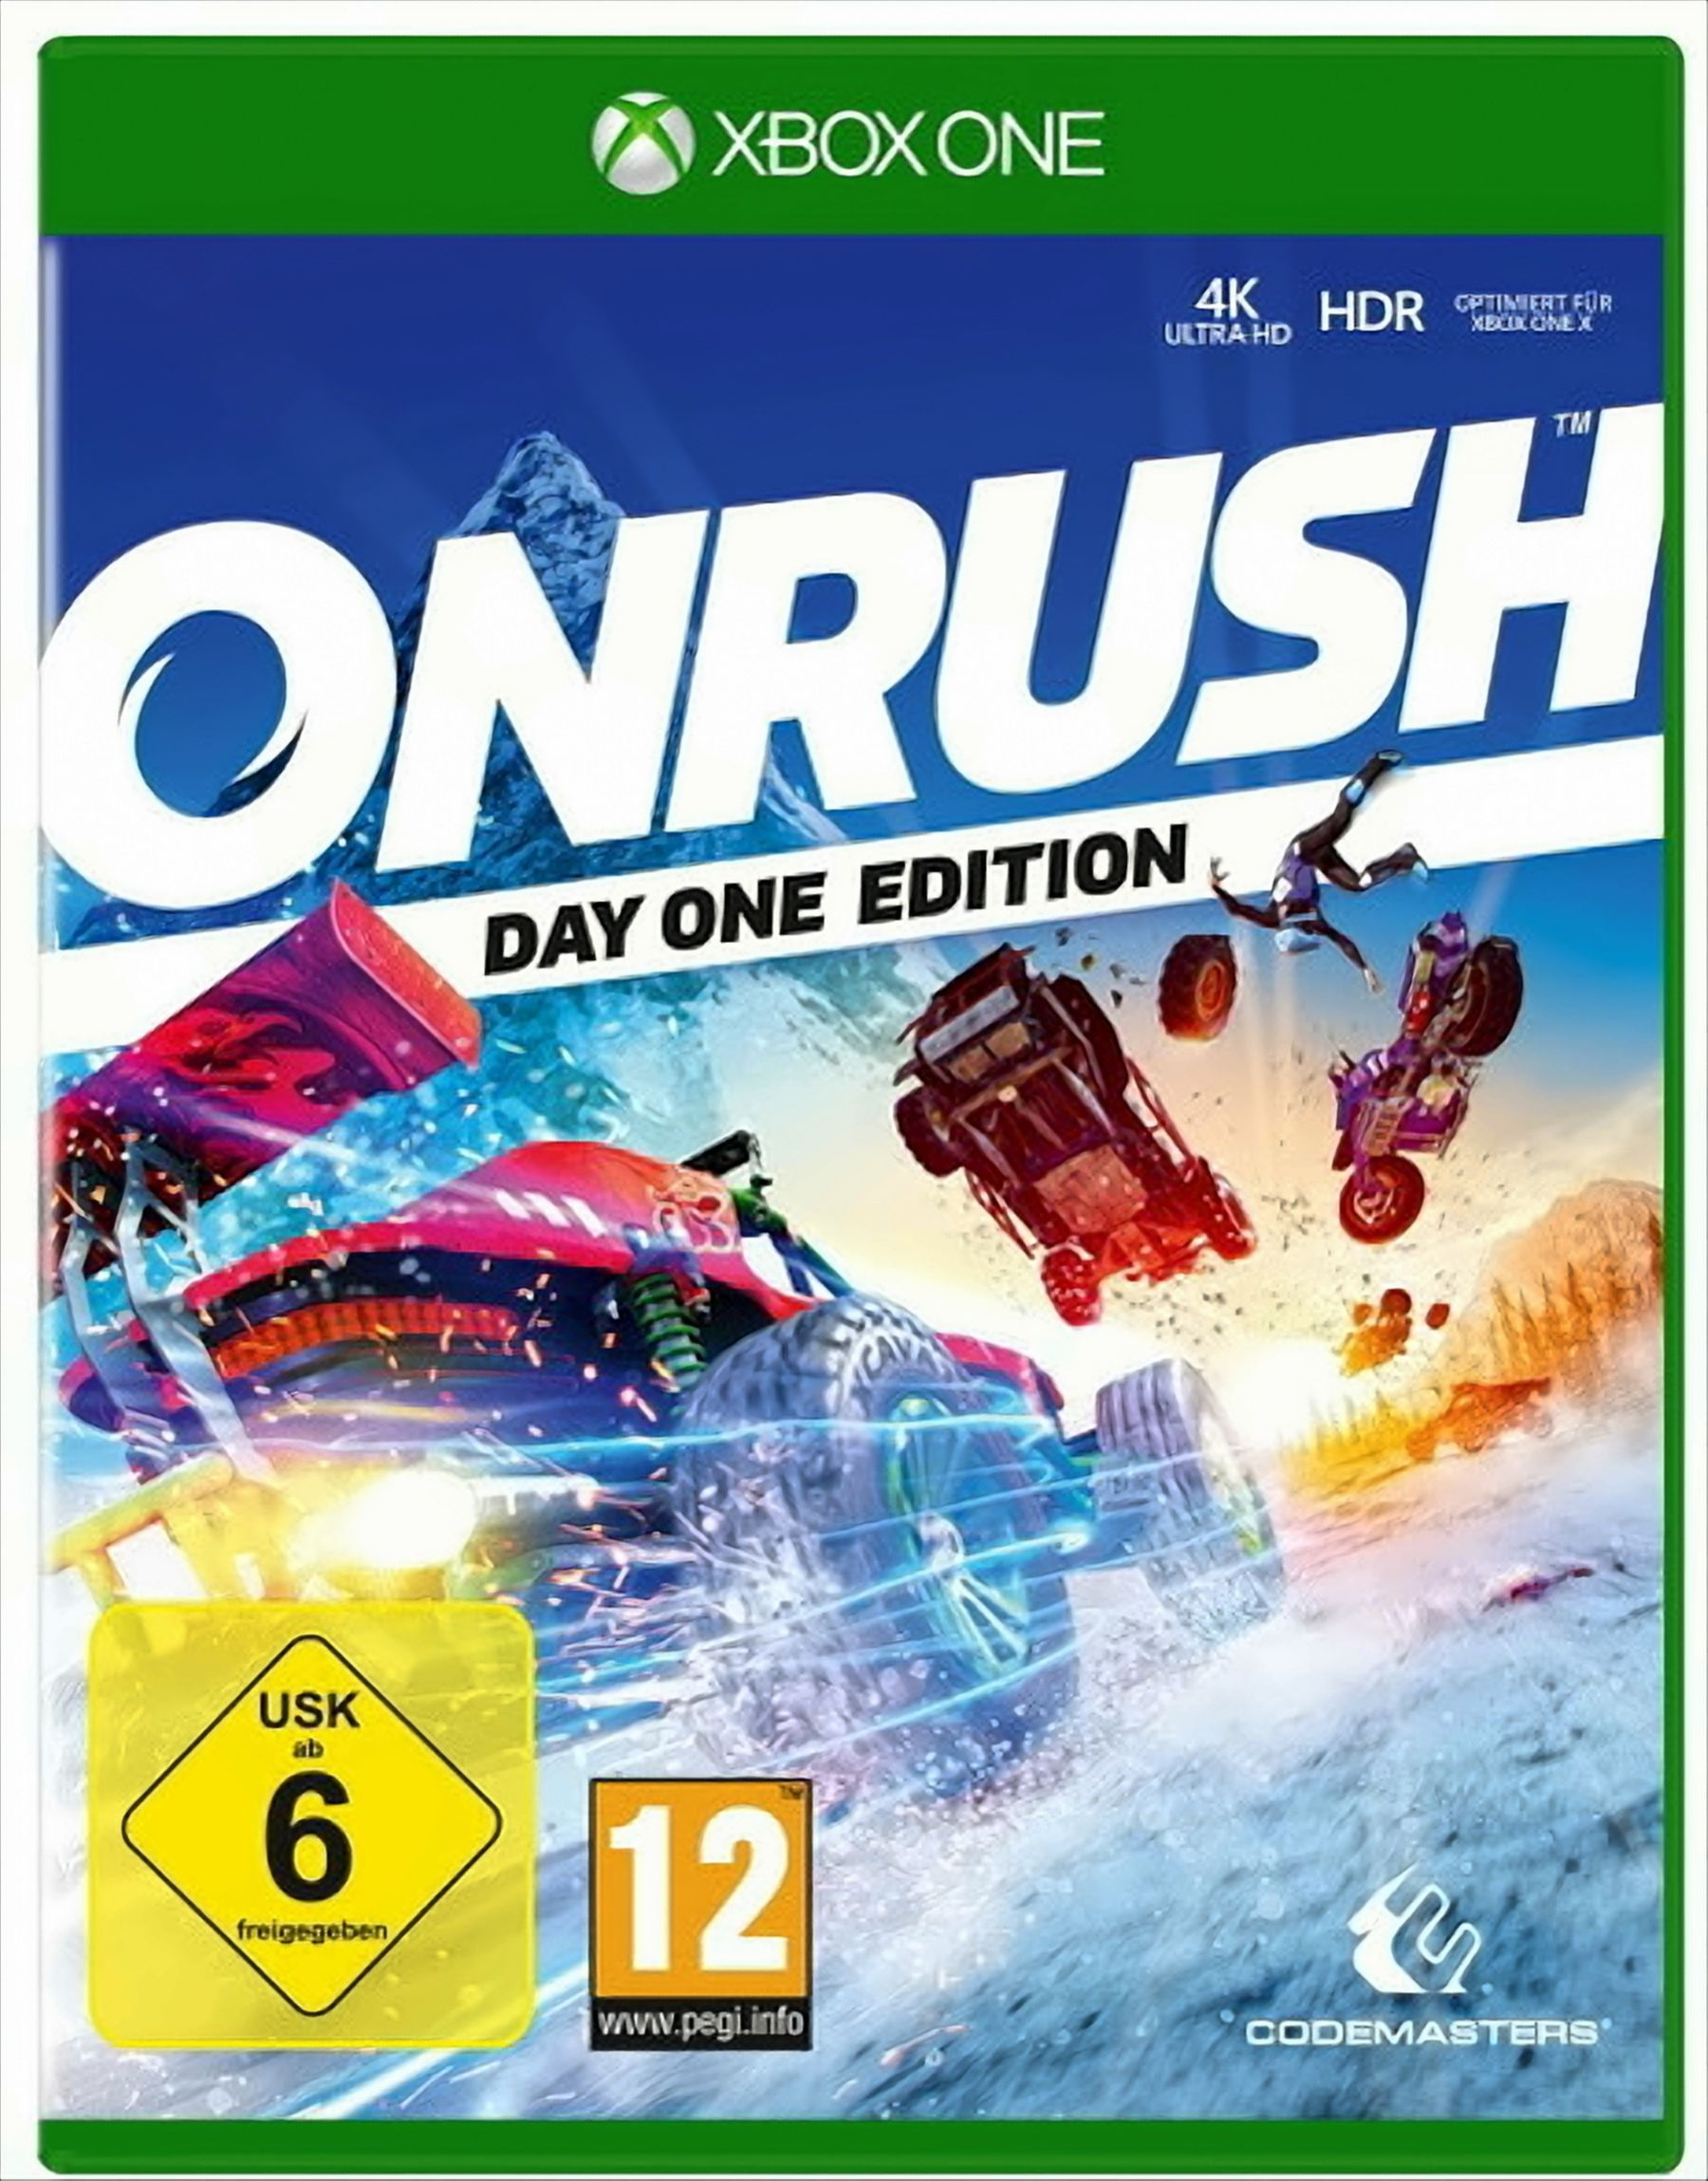 One [Xbox One] Edition - Day - Onrush